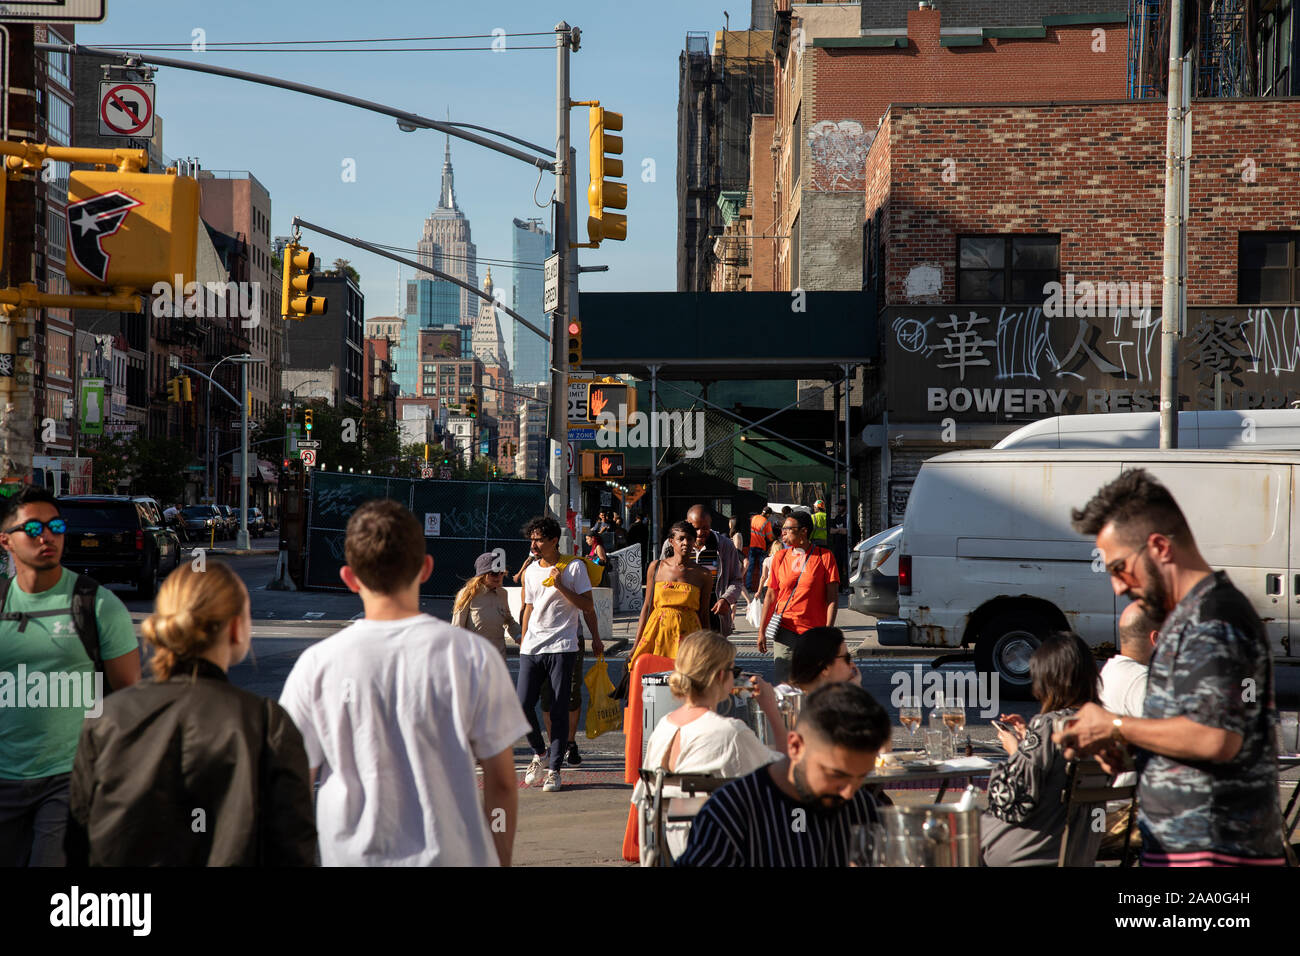 Busy street scene in Bowery, Manhattan, Empire State Bldg In Distance Stock Photo